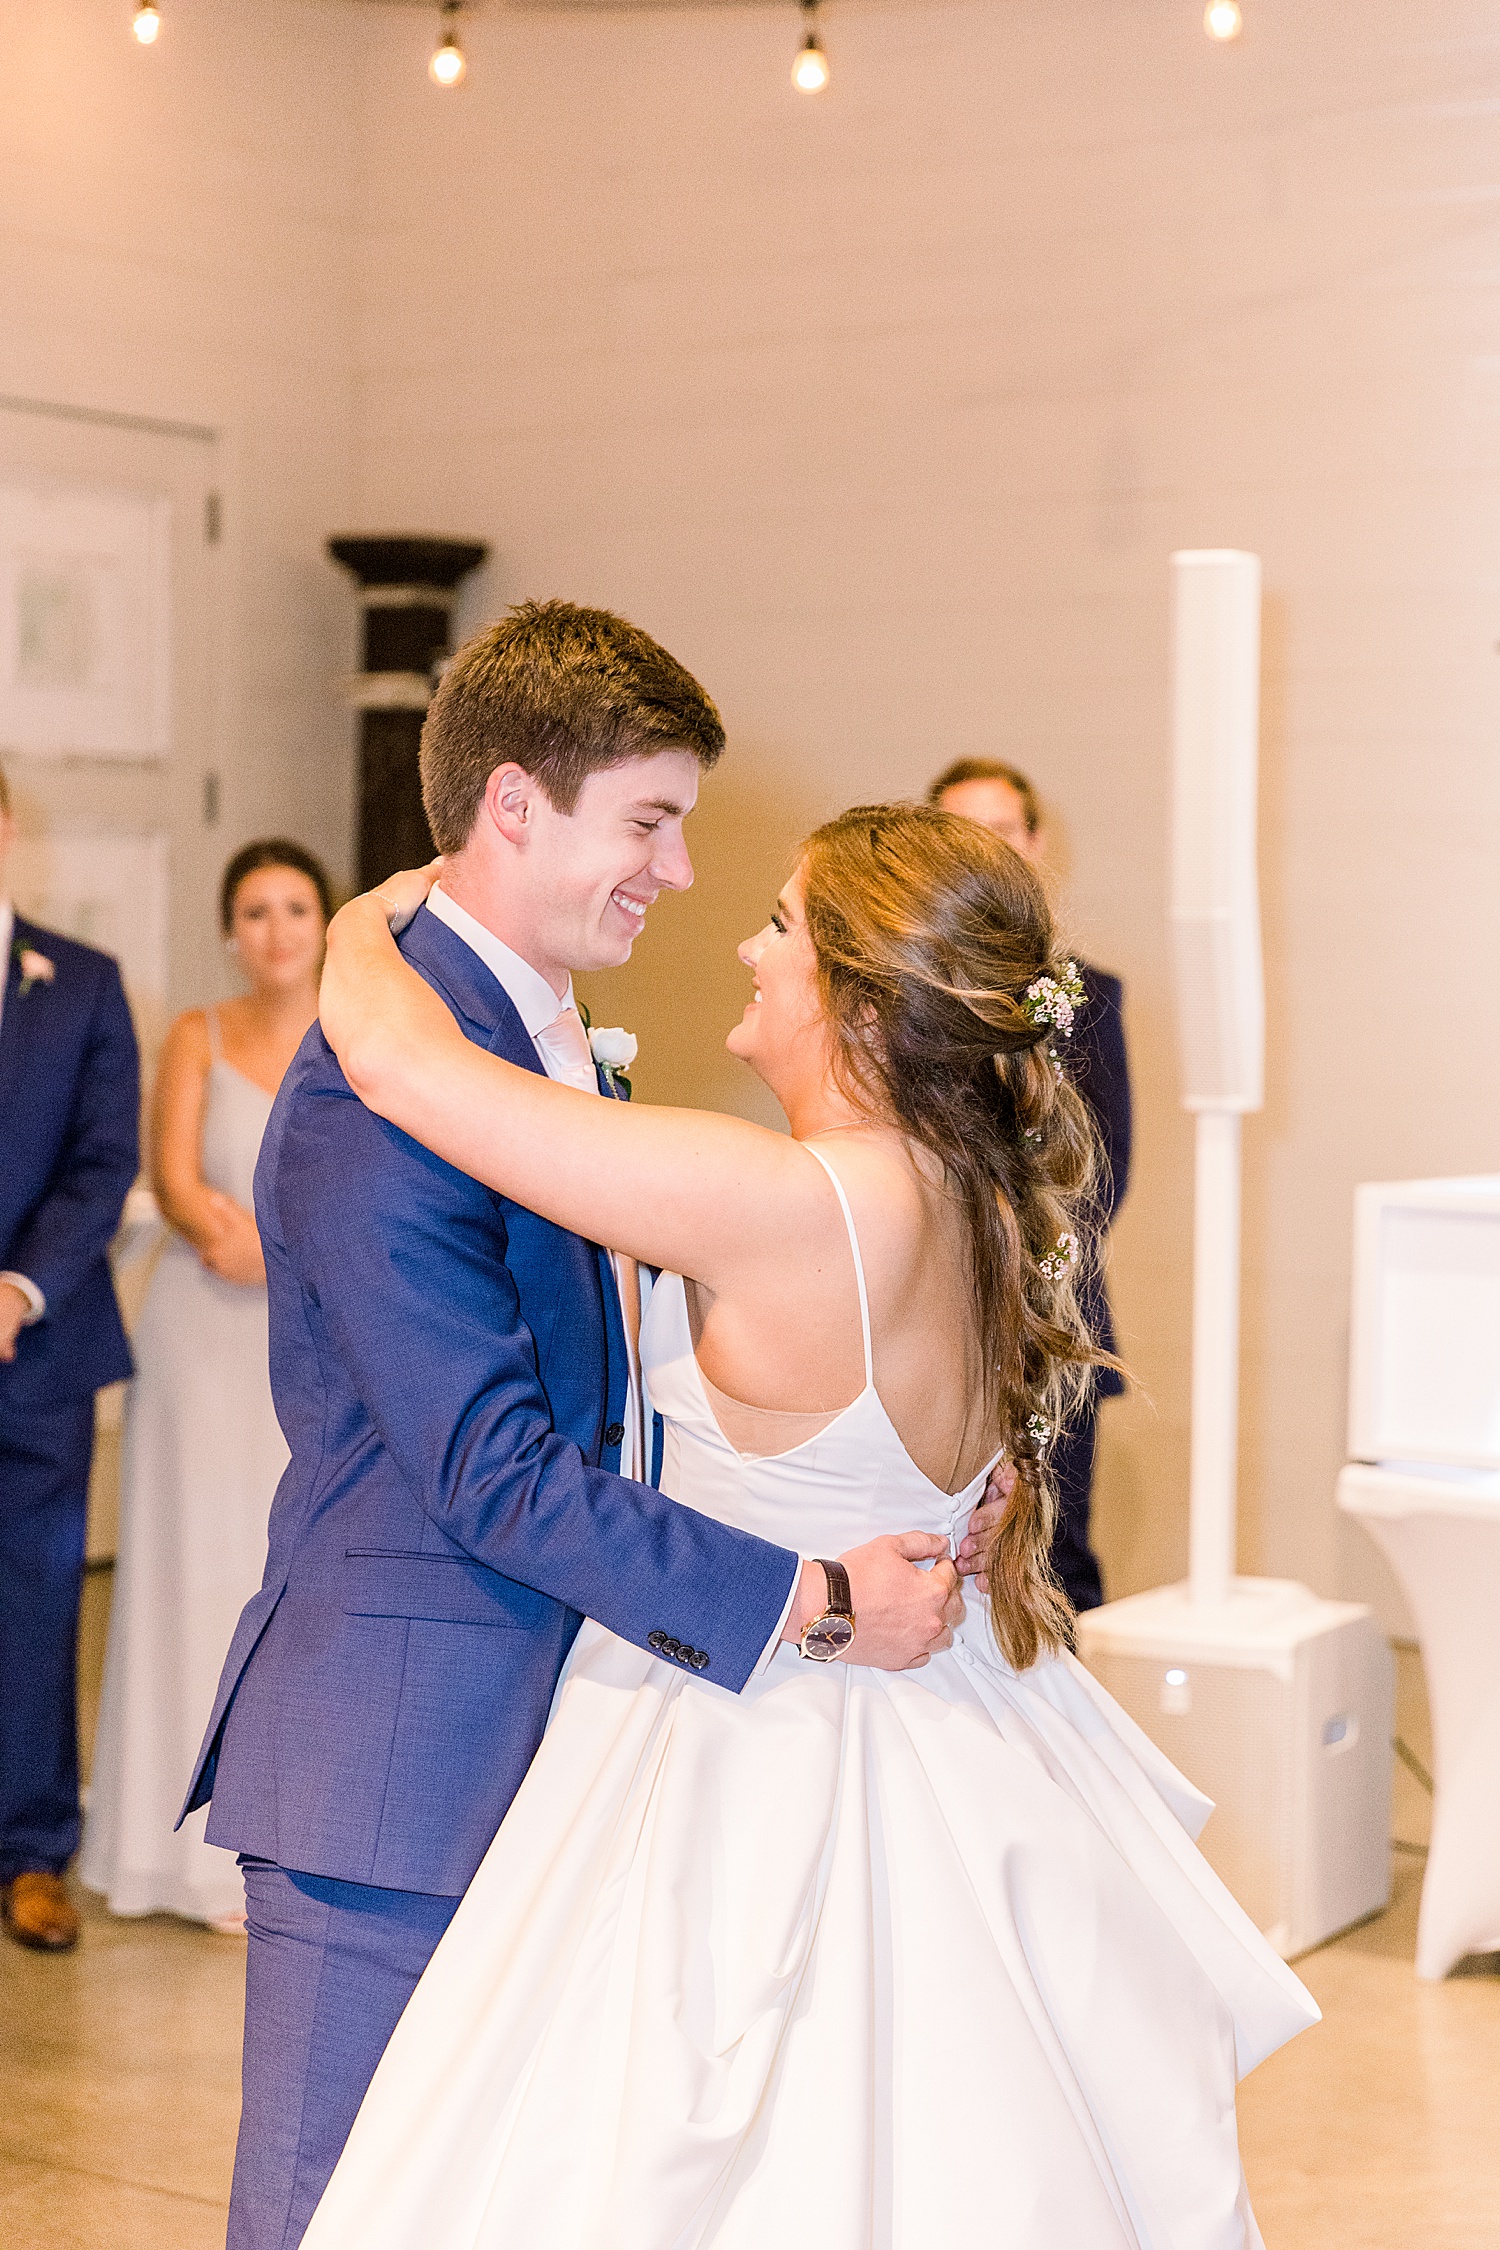 Newlyweds share first dance together during AL wedding reception